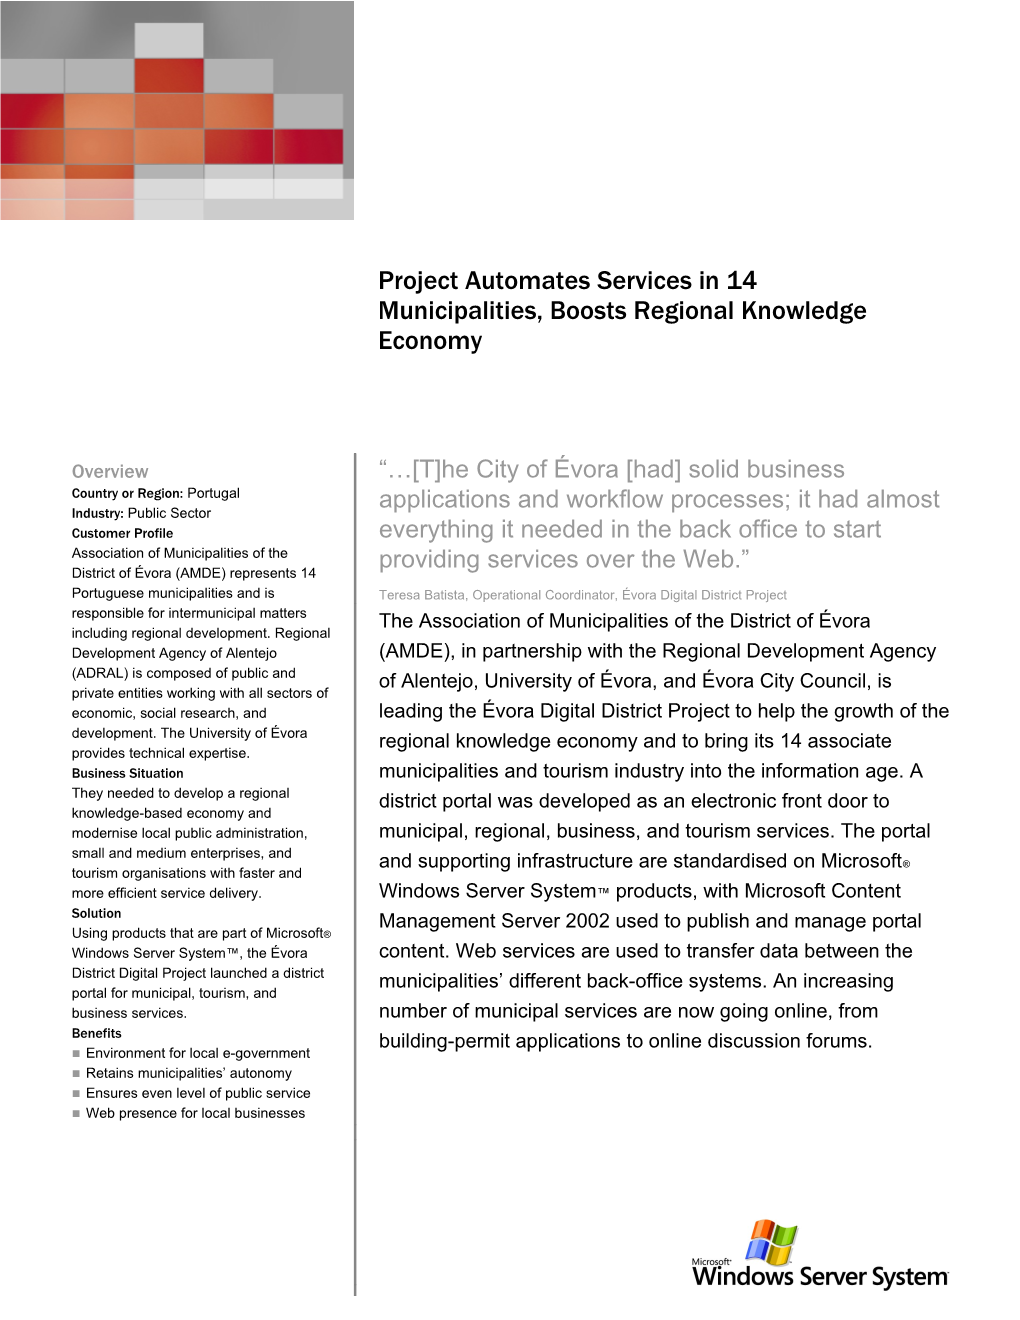 Project Automates Services in 14 Municipalities, Boosts Regional Knowledge Economy